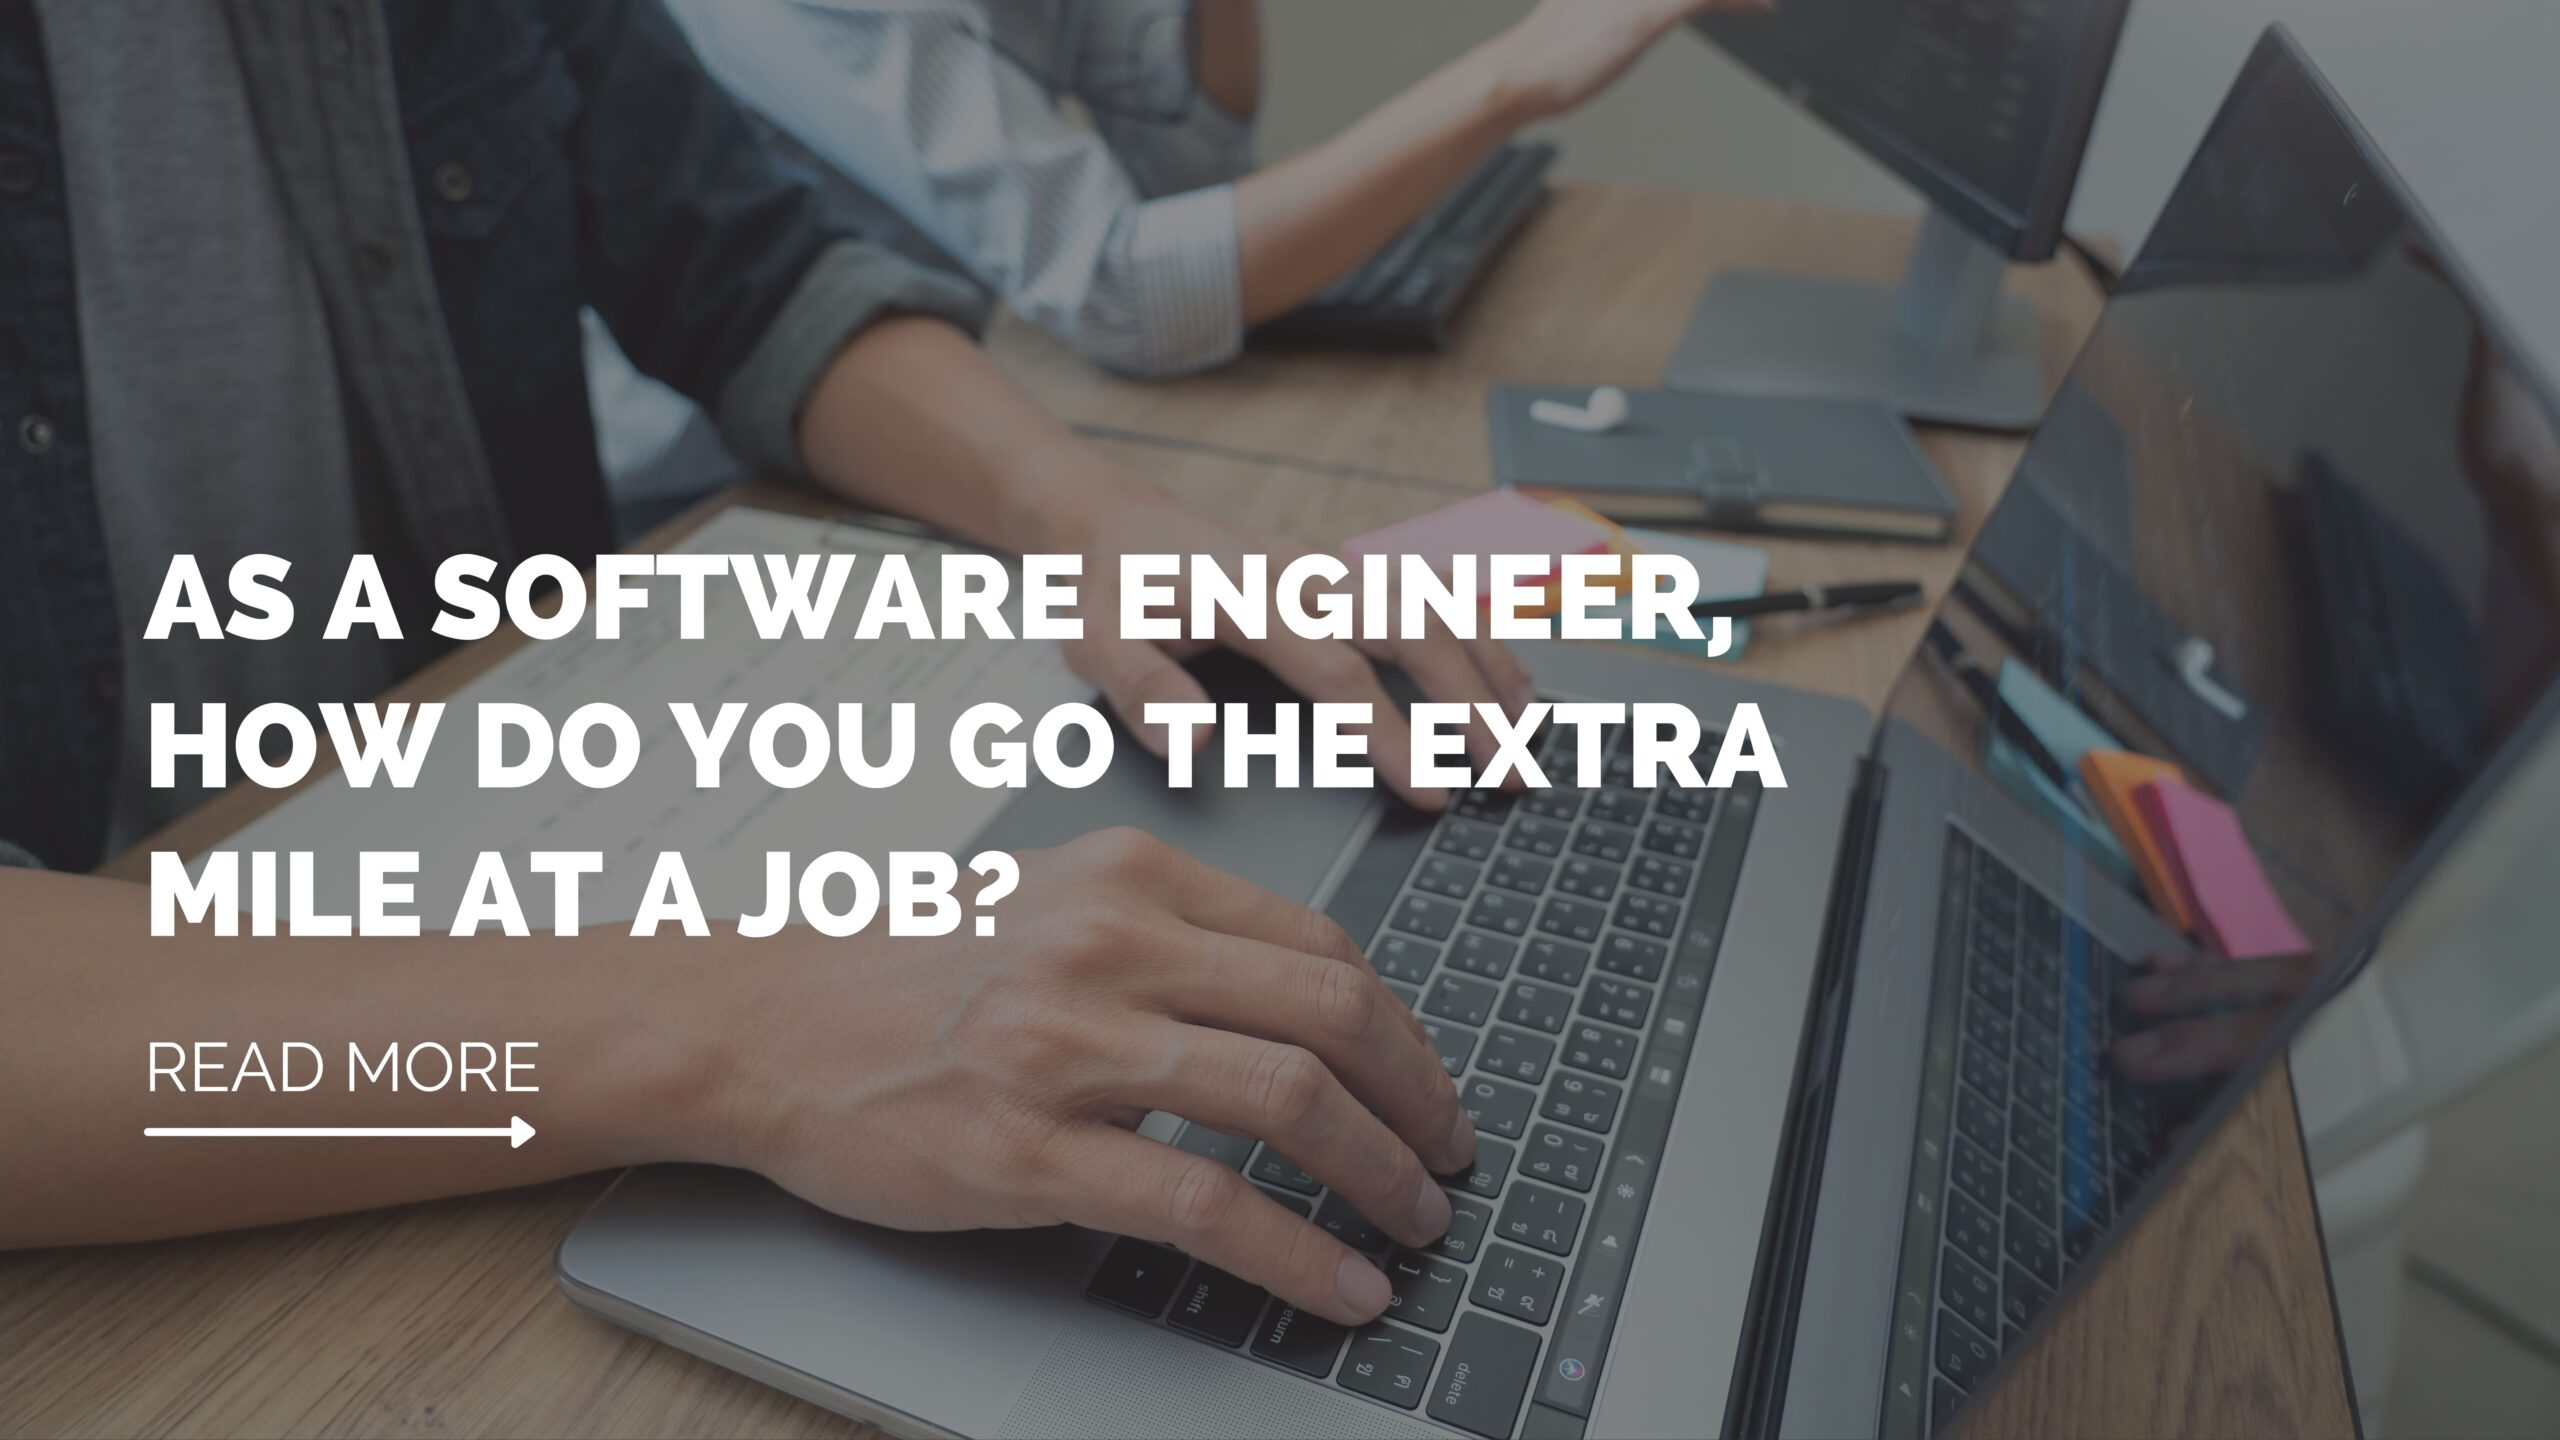 software engineering career and how to go the extra mile